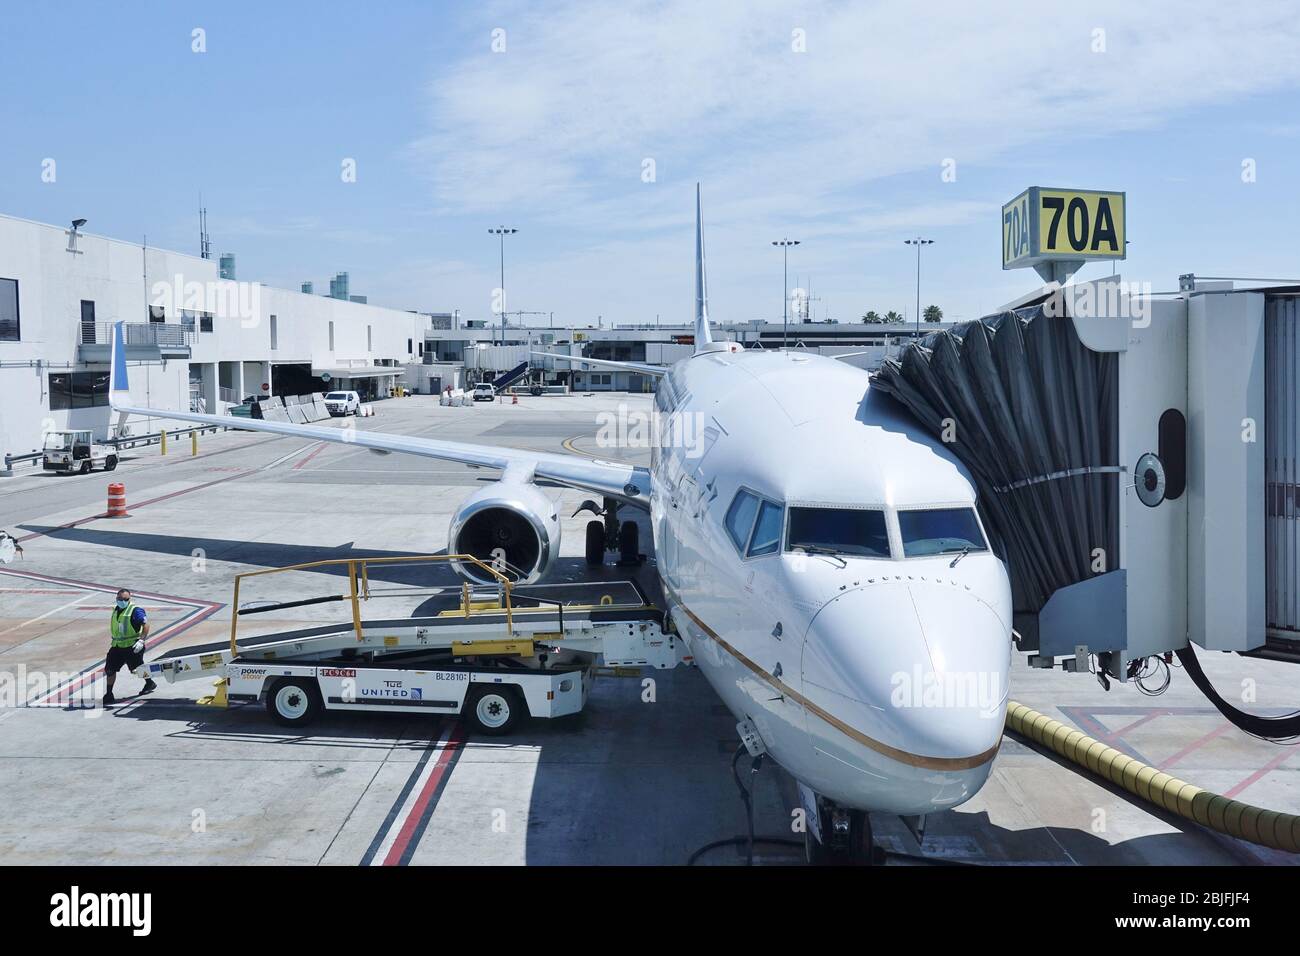 Los Angeles Ca 26 Apr 2020 An Airplane From United Airlines Ua And A Baggage Handler Wearing A Face Mask During The Covid 19 Crisis At The Los An Stock Photo Alamy,Game Of Thrones Toilet Seat